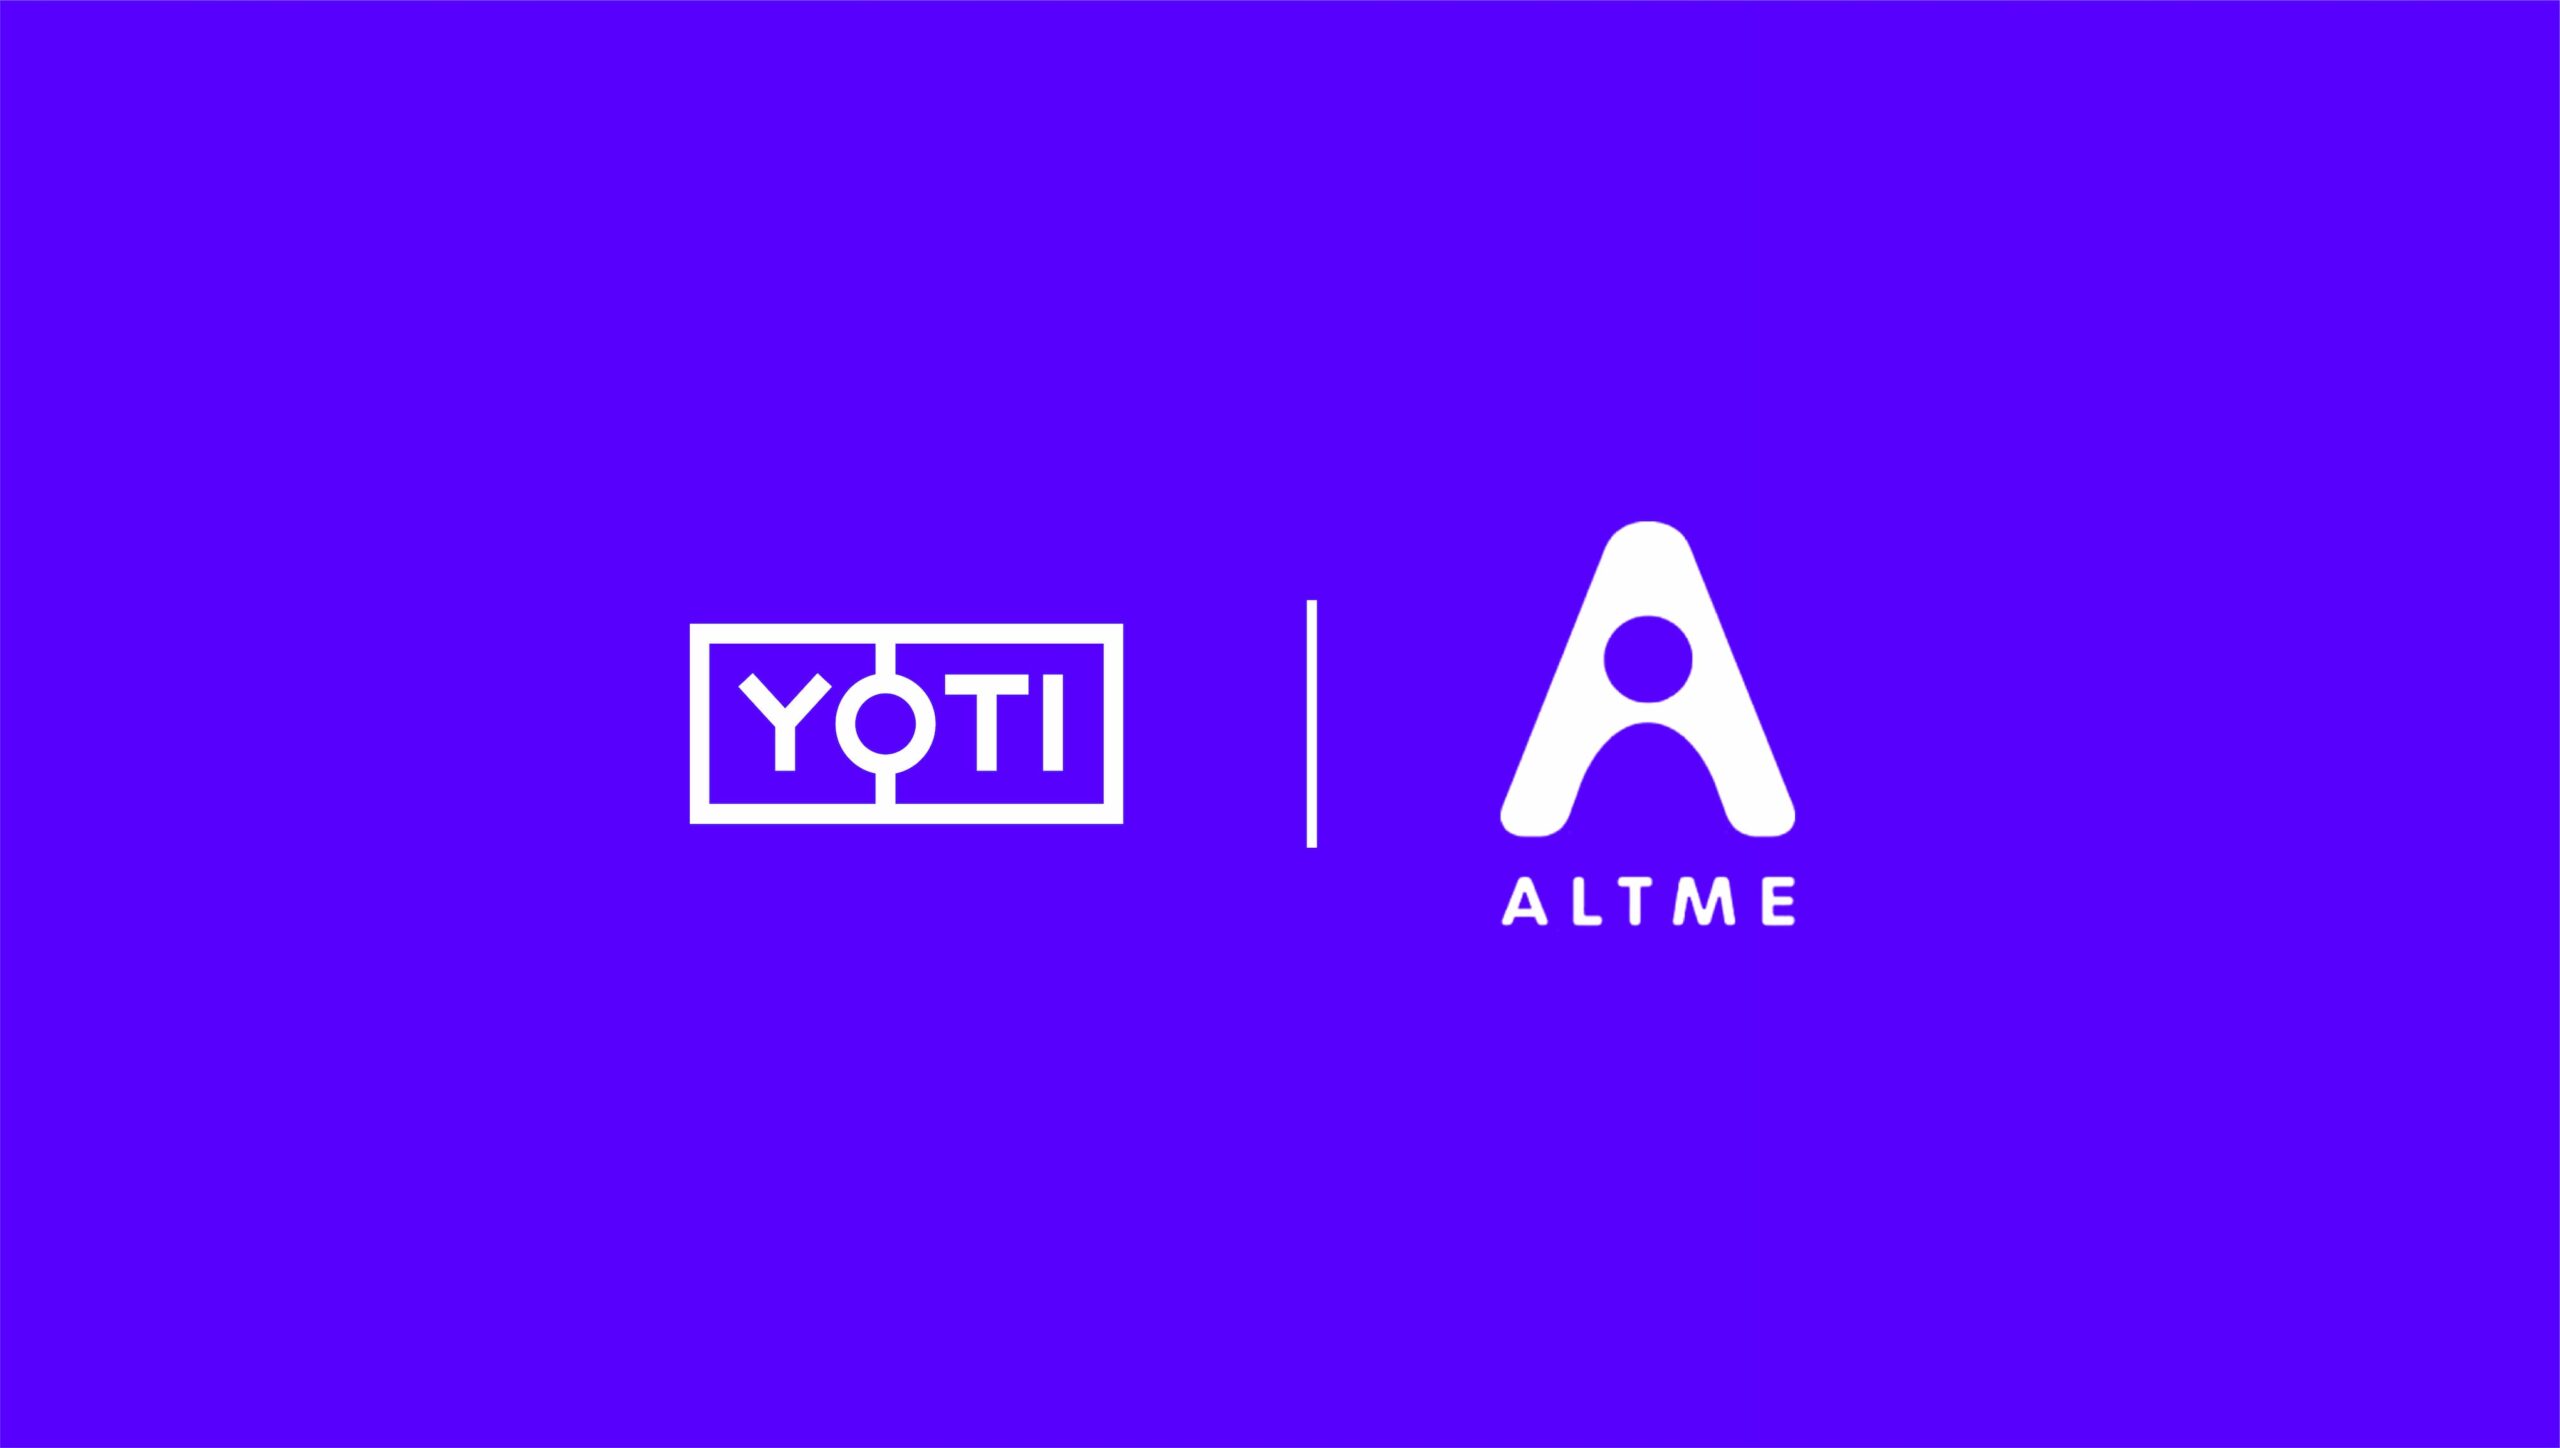 Yoti and Altme logos presented together